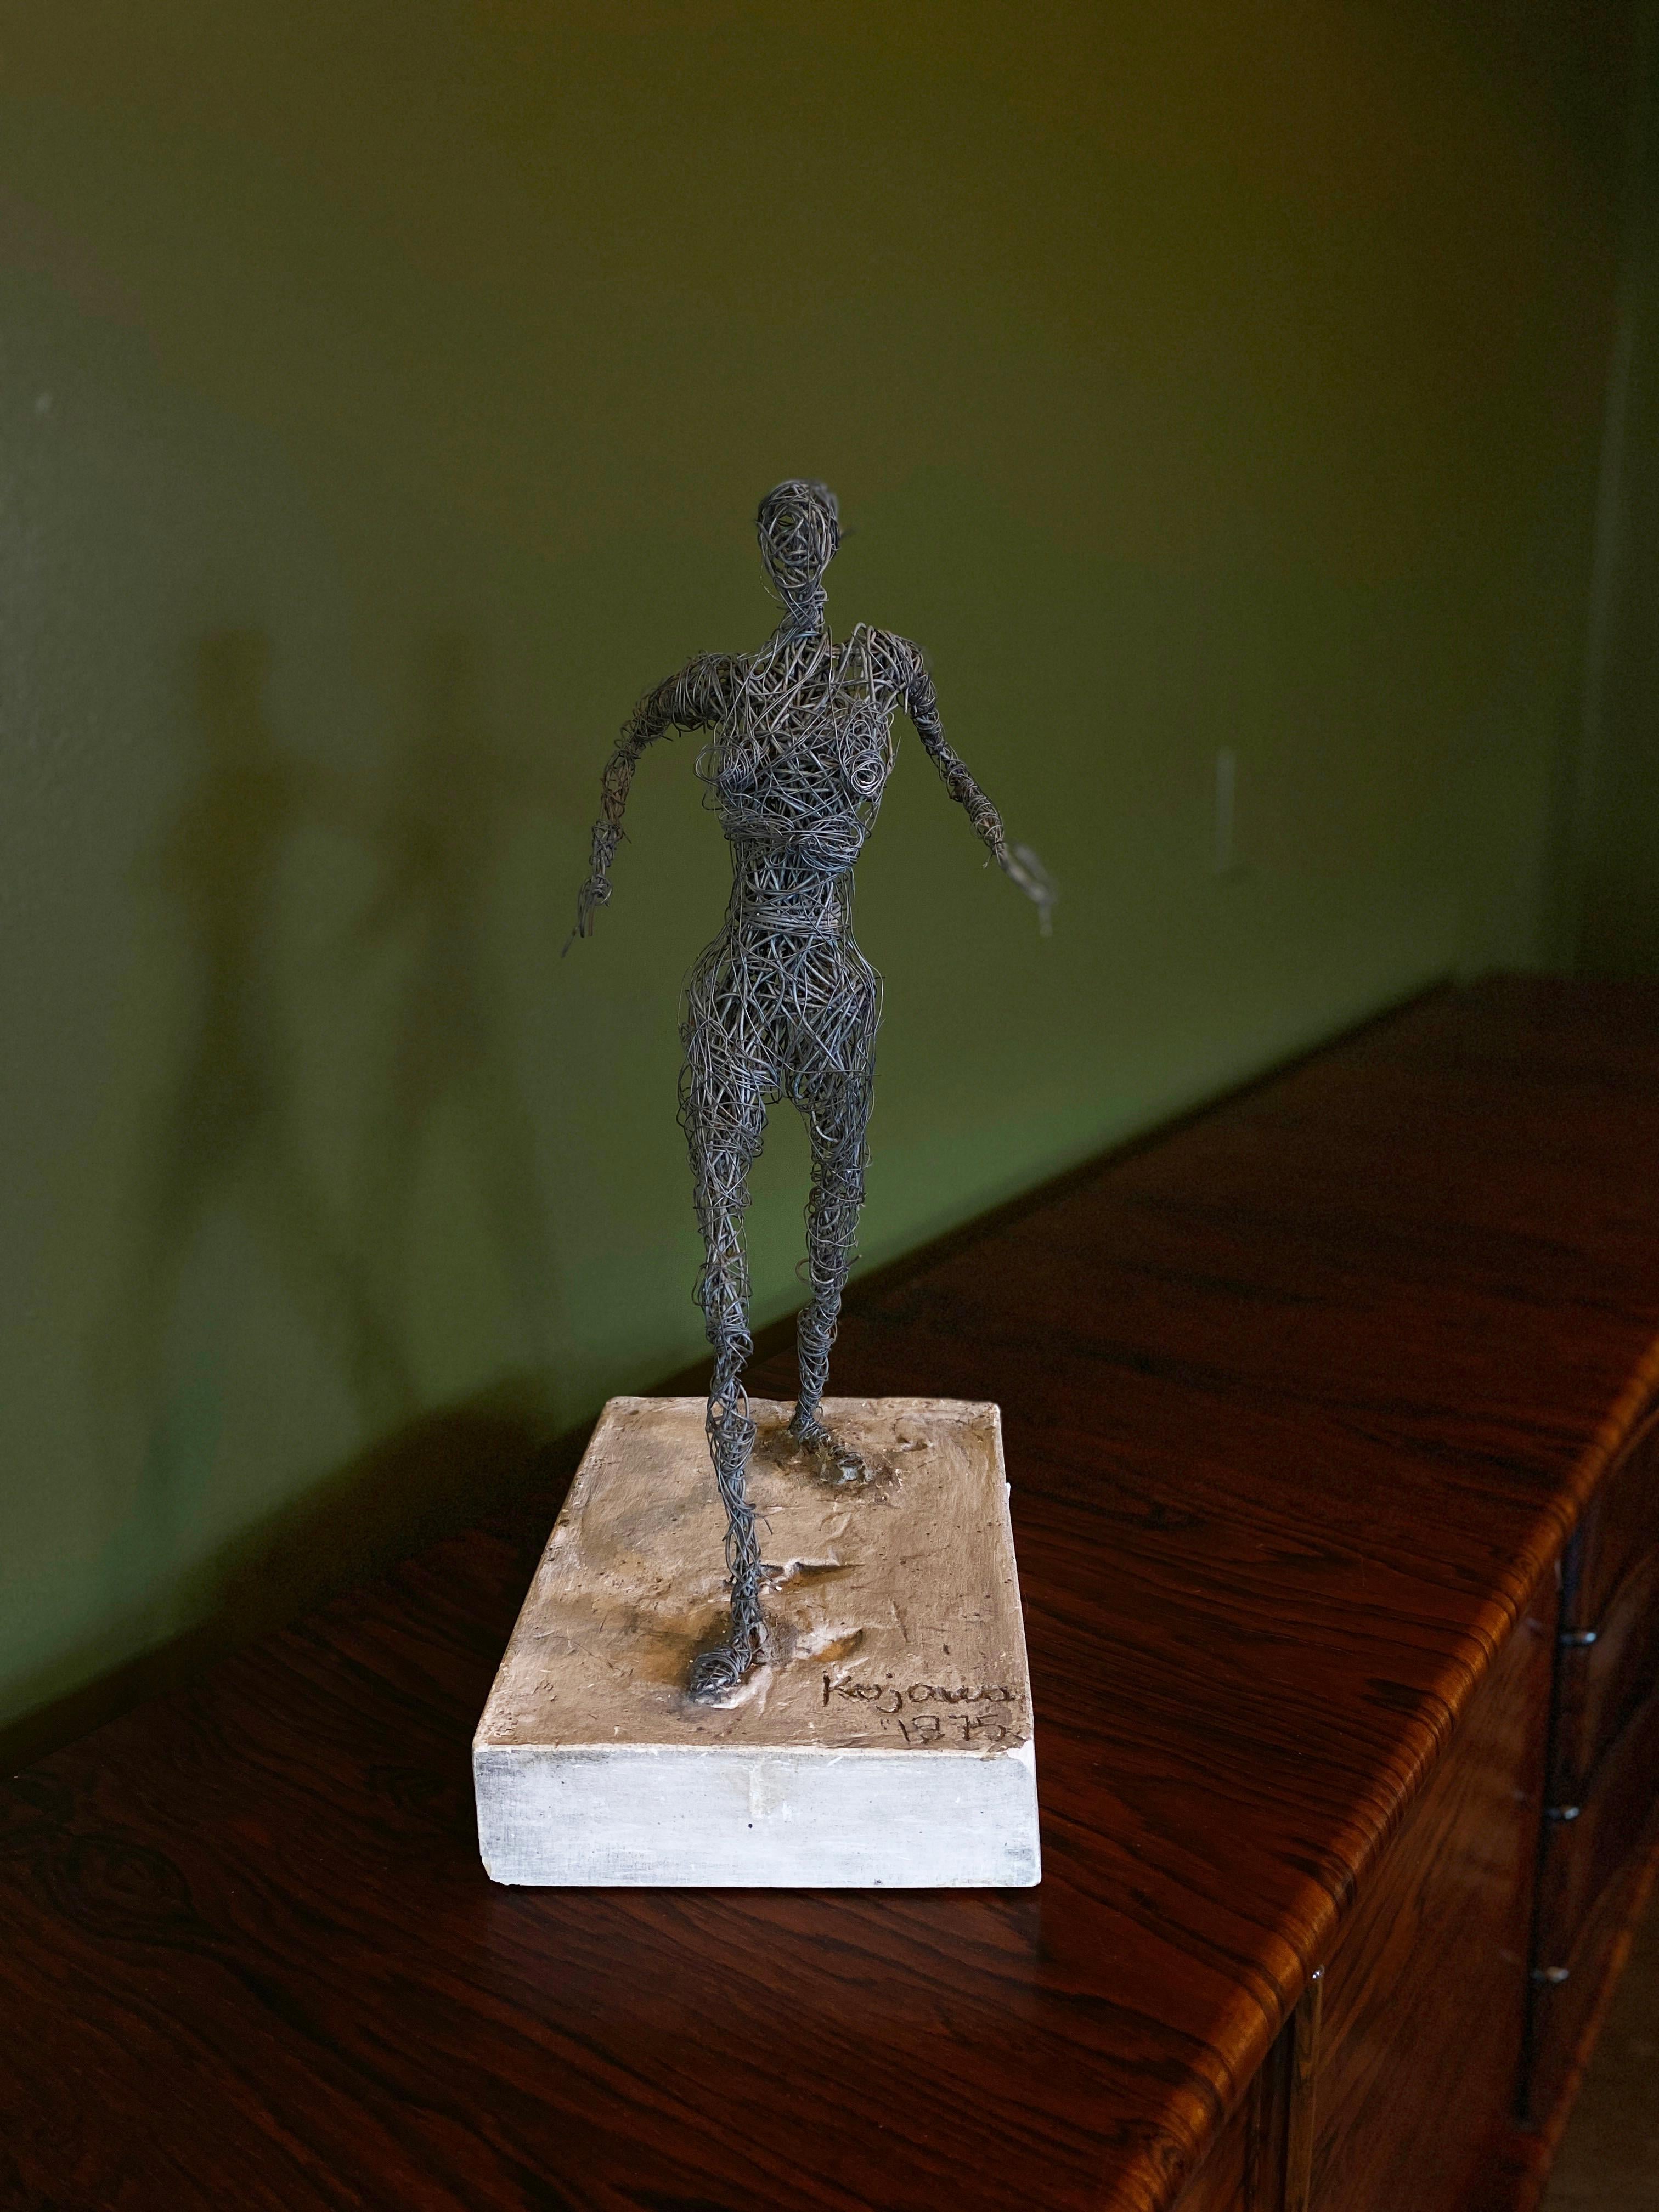 Female figure sculpted in wire on cast concrete base, signed Kujawa 1975. Kujawa was a student of the famed French sculptor Cesar Baldaccini. One of three unique figures available. 

Other two figures listed